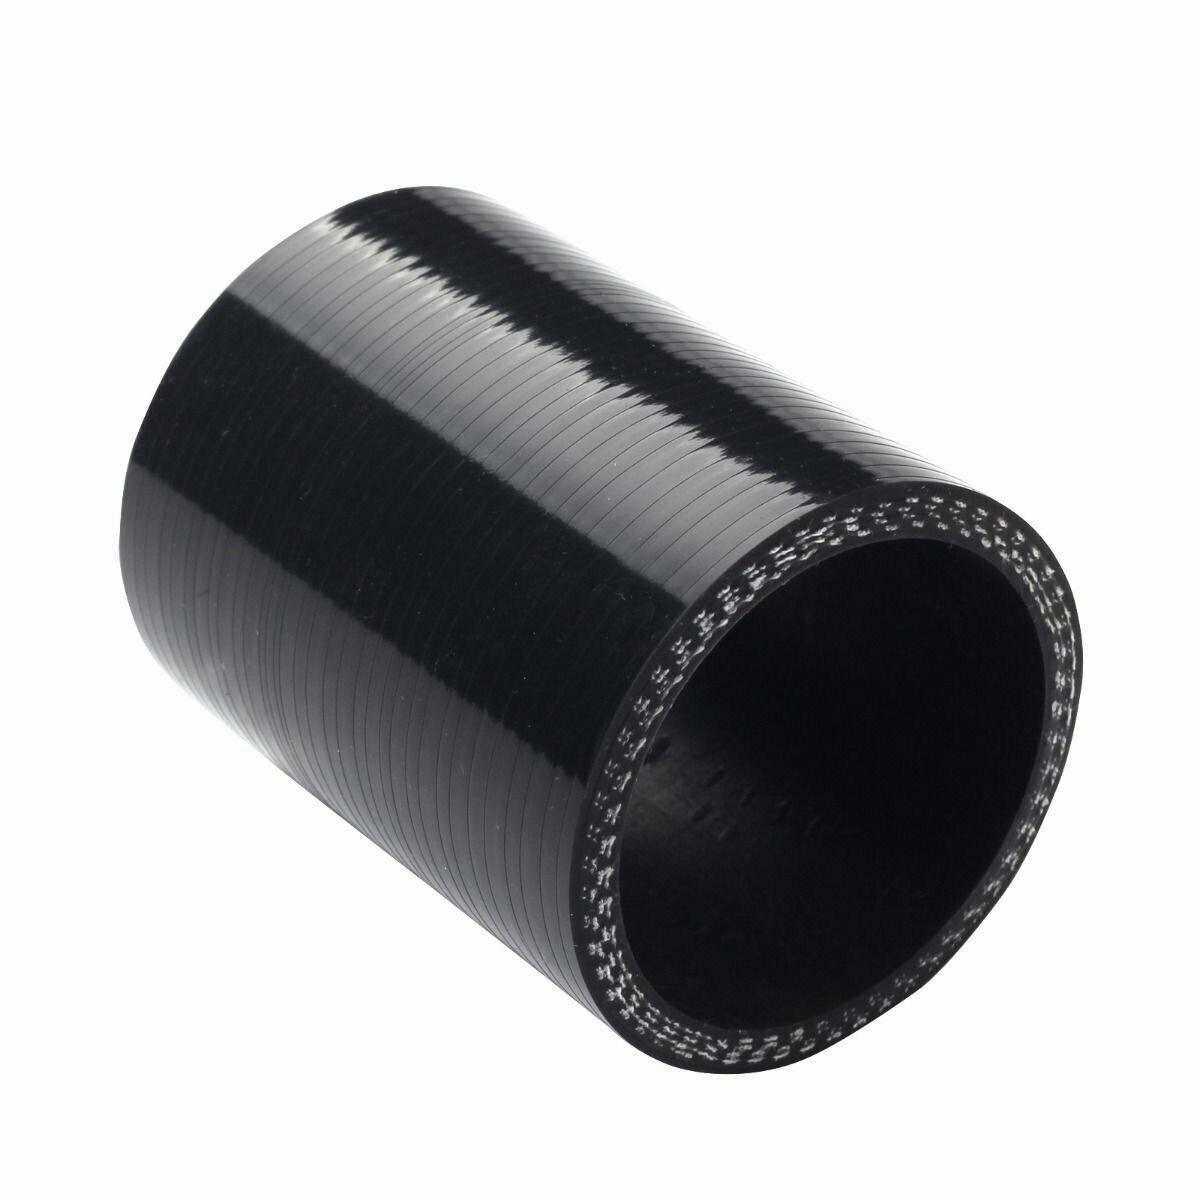 2.5" 4PLY STRAIGHT TURBO/INTAKE PIPE 63MM SILICONE COUPLER REDUCER HOSES BK - www.blackhorse-racing.com